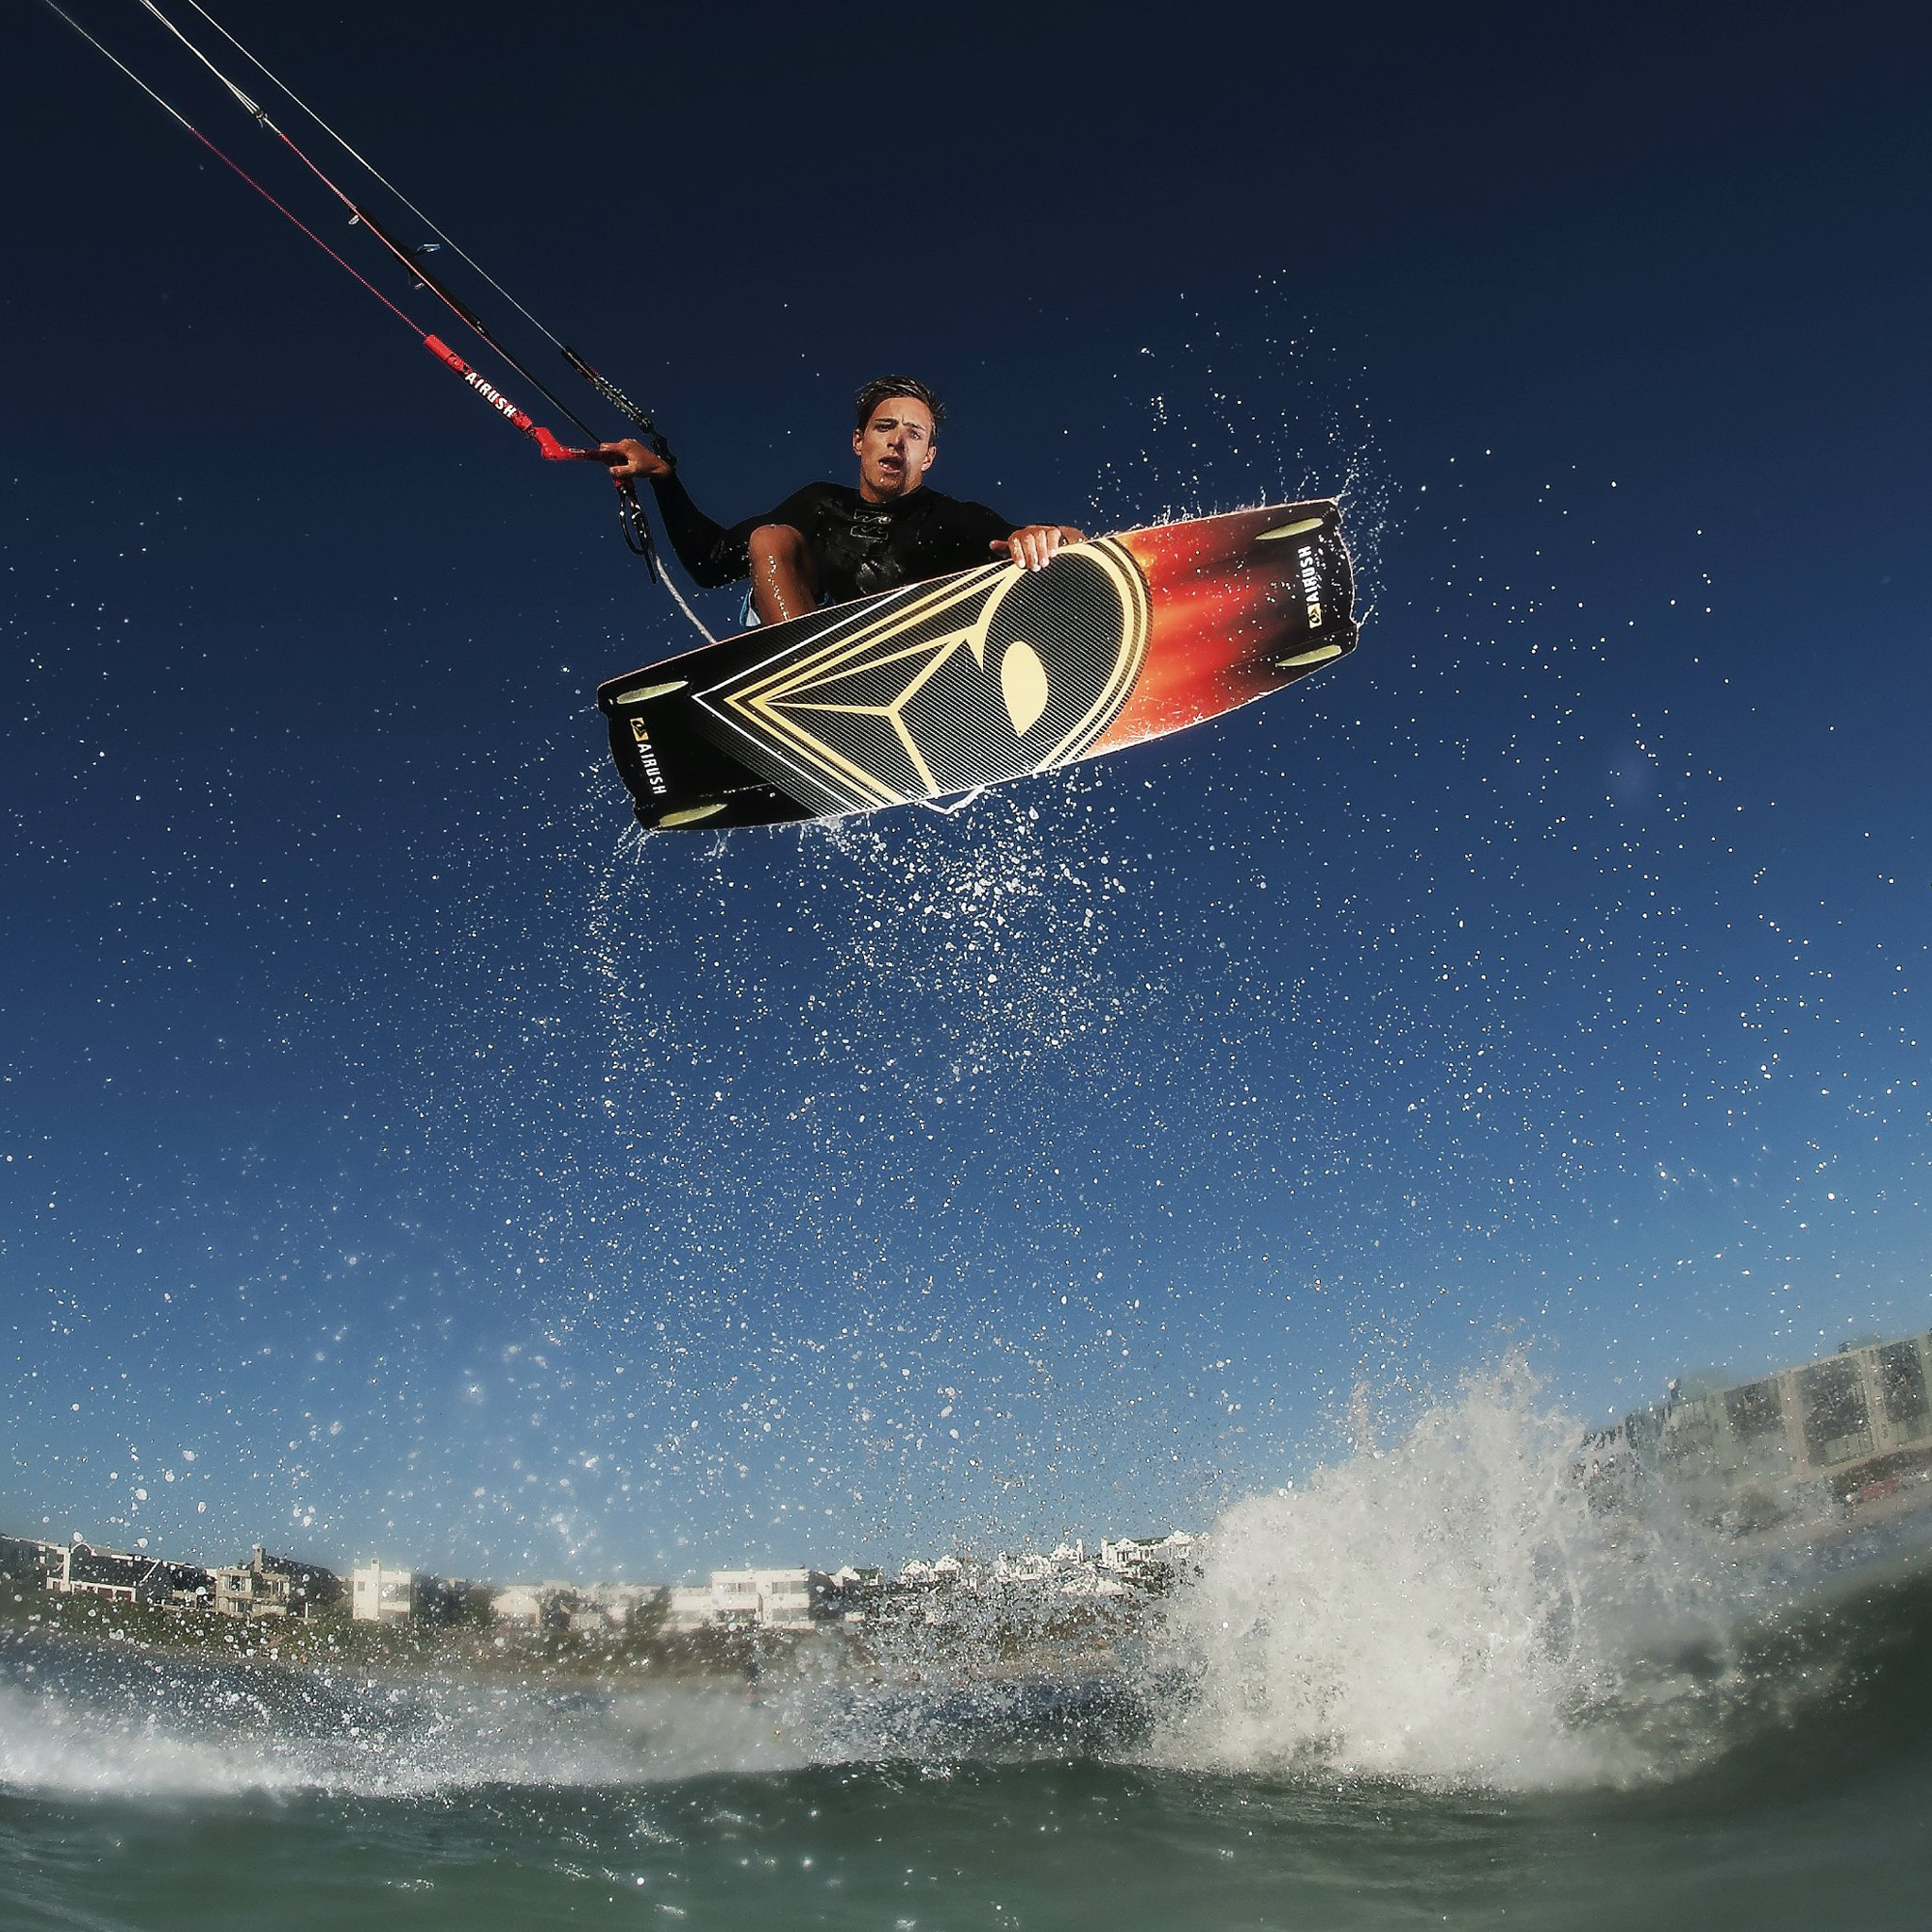 2048x2048 kitesurf wallpaper image - Oswald Smith with a nice Indie Grab at twilight  - in resolution